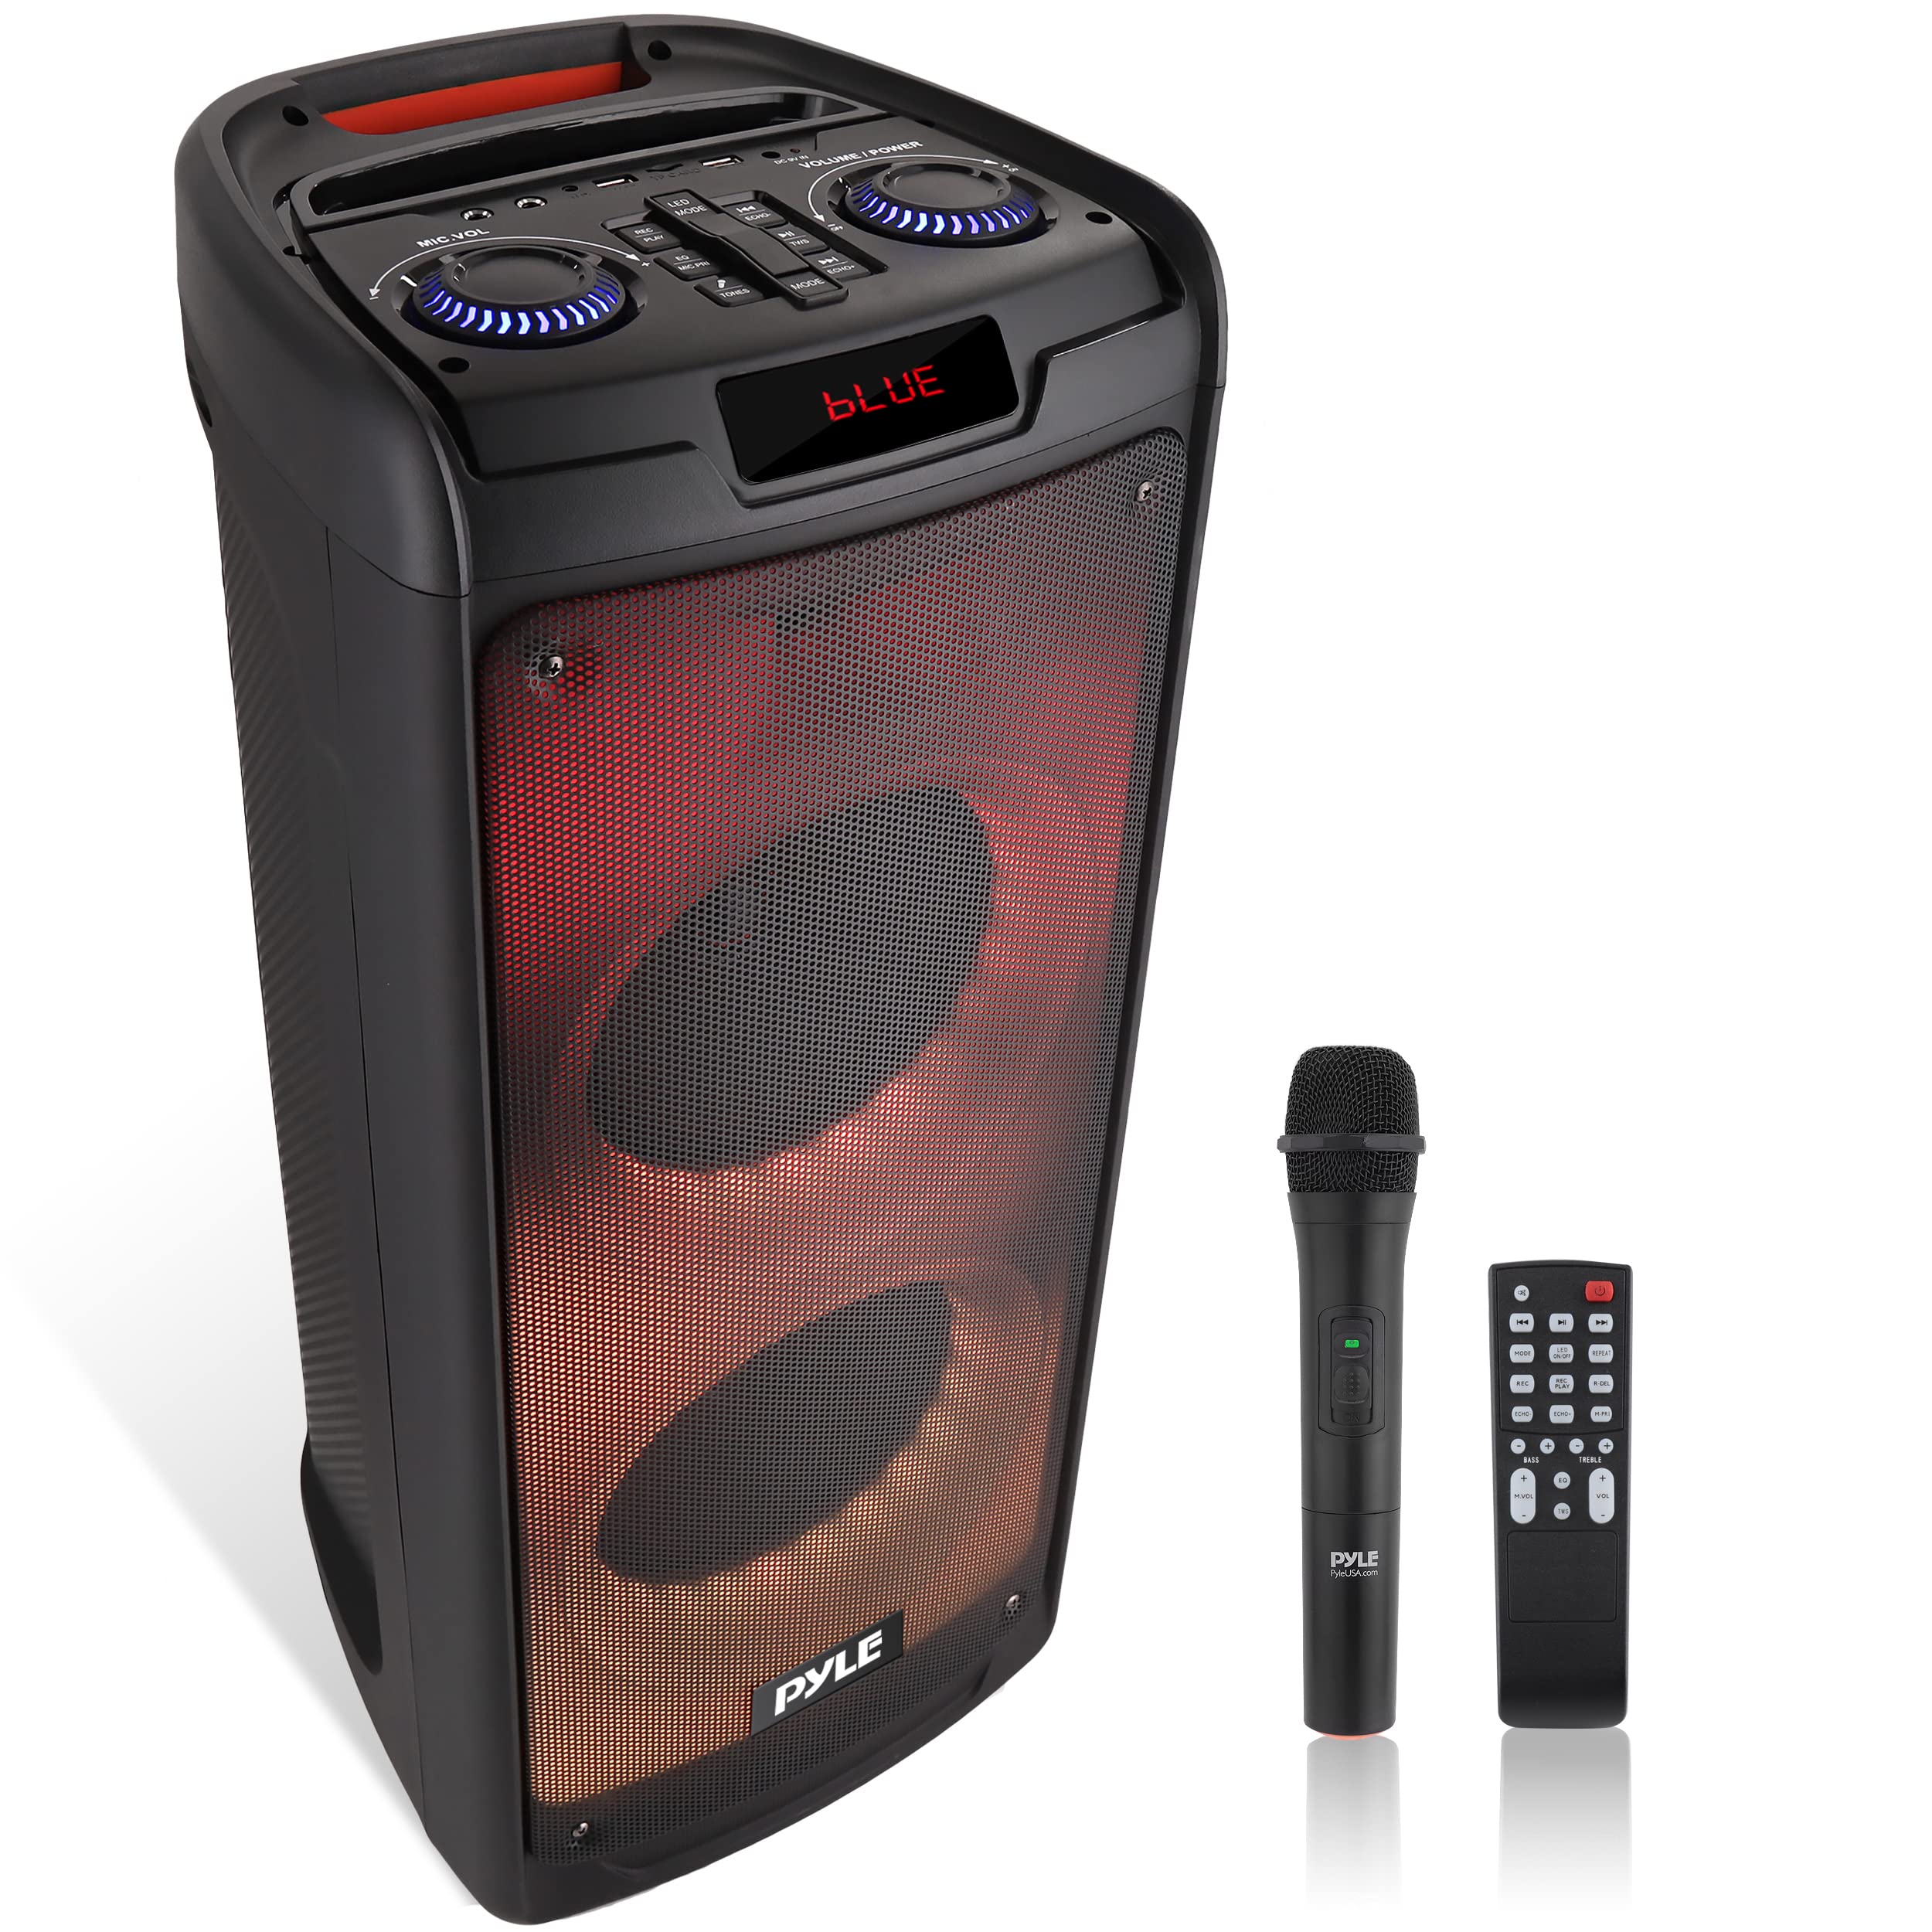 Pyle Portable Bluetooth PA Speaker System - 500W Rechargeable Indoor Outdoor Stereo w/ Dual 8” Woofer & Tweeter, Audio Recording, Wireless Microphone, Flaming Light, Radio, MP3/USB/Micro SD, Remote